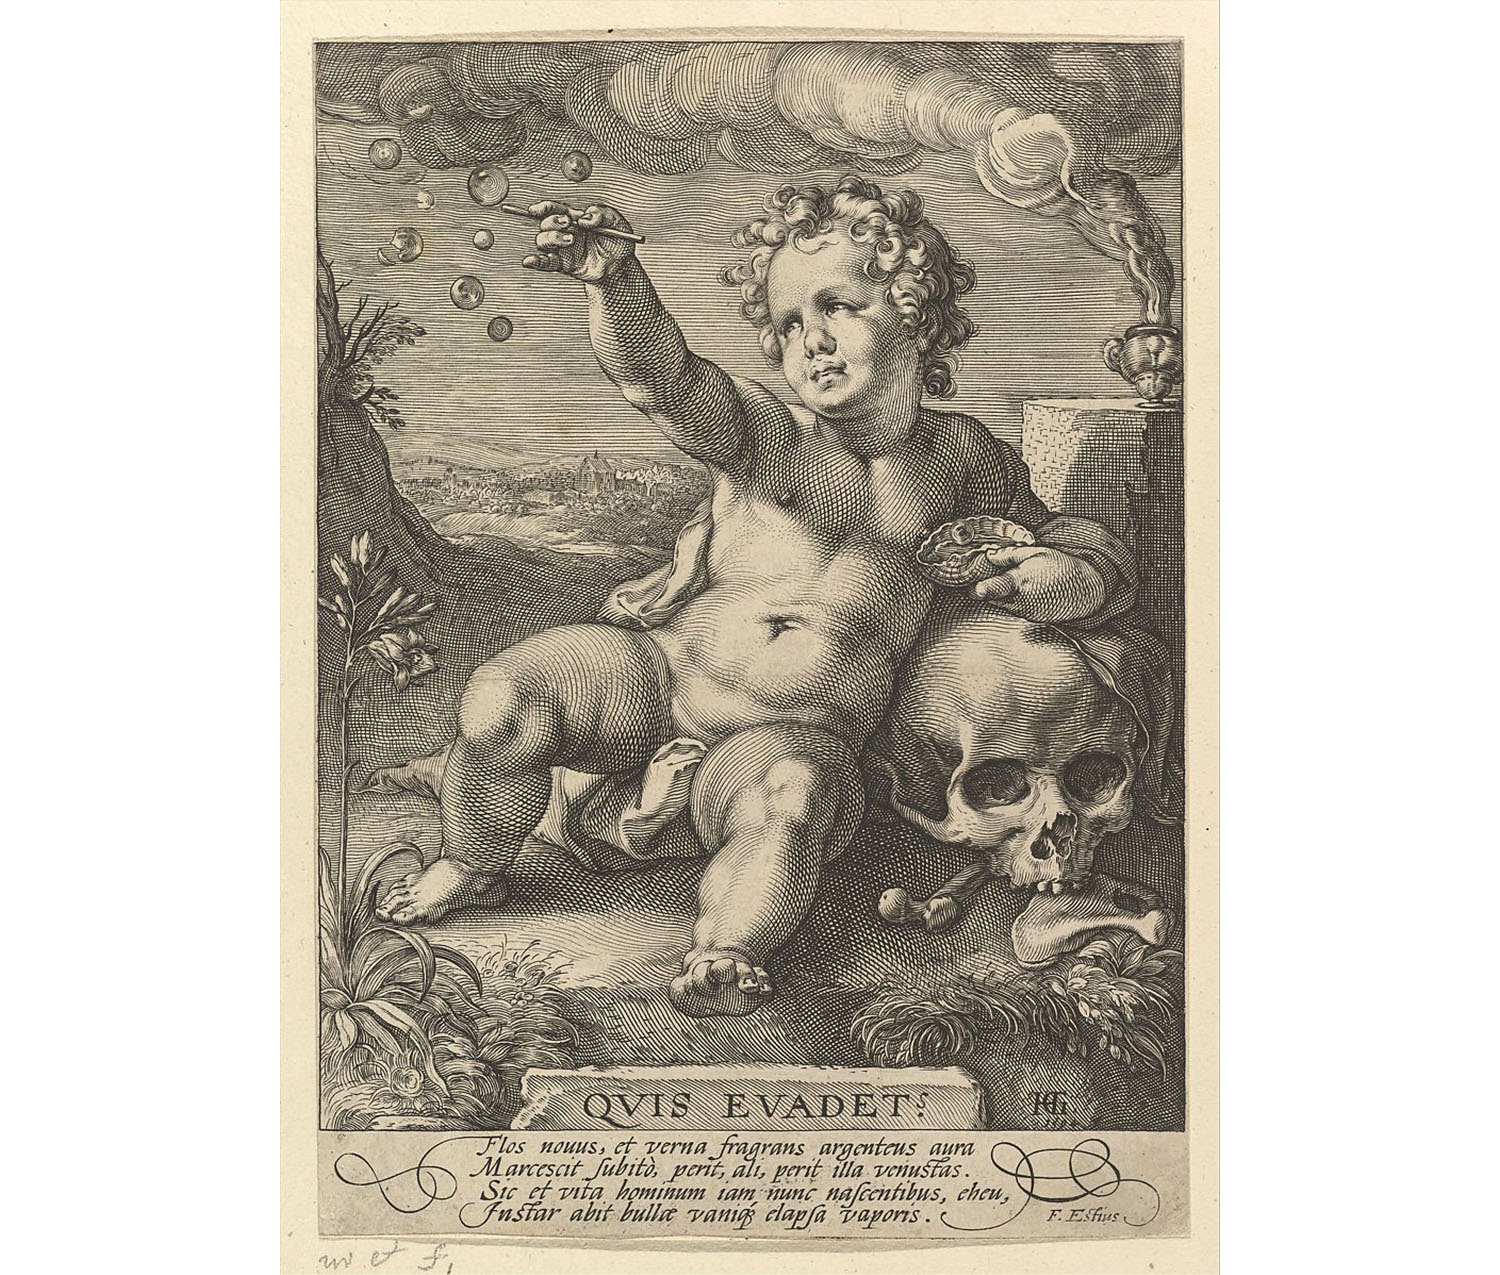 small baby with curly hair, resting his left arm on a large skull, sitting on the ground surrounded by flowers and smoke